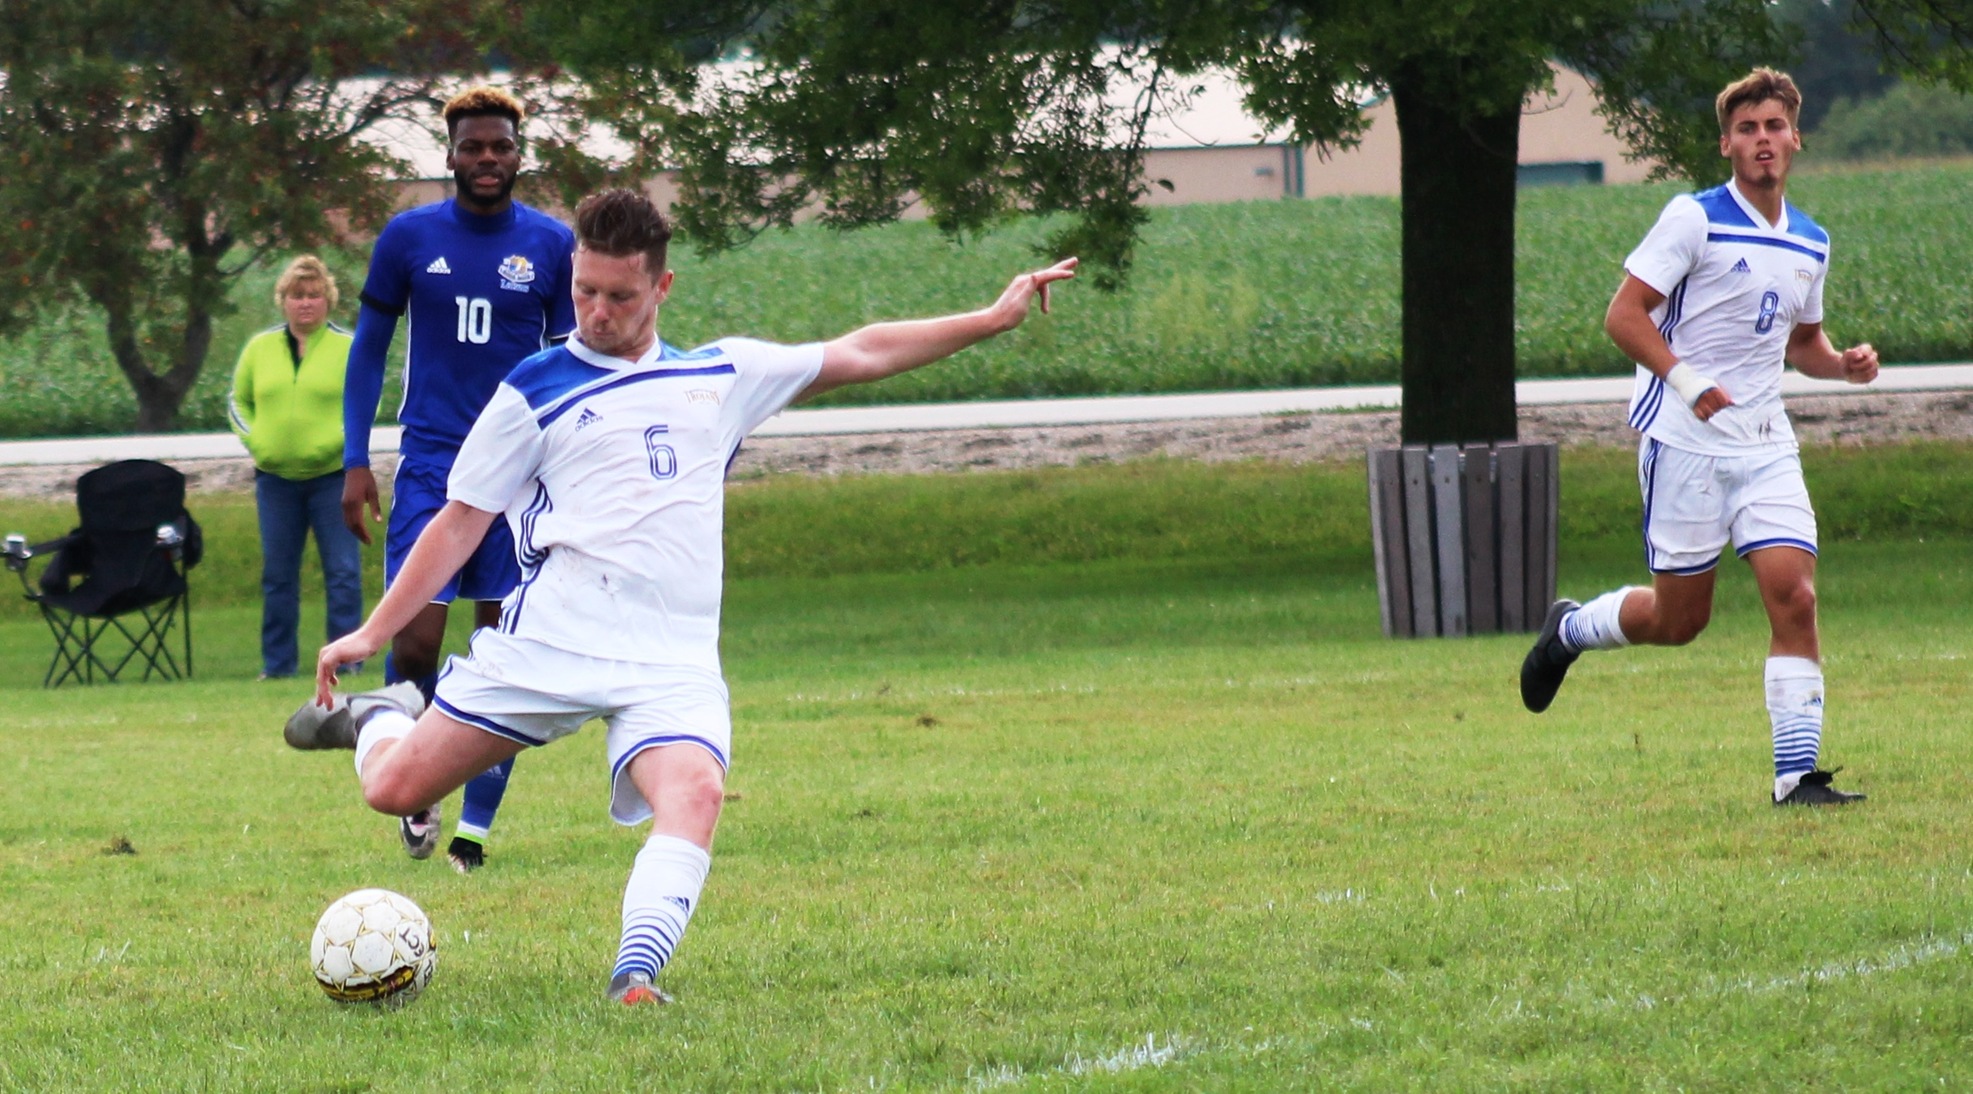 NIACC's Cian Morley kicks the ball down the field in Wednesday's match against Iowa Lakes.